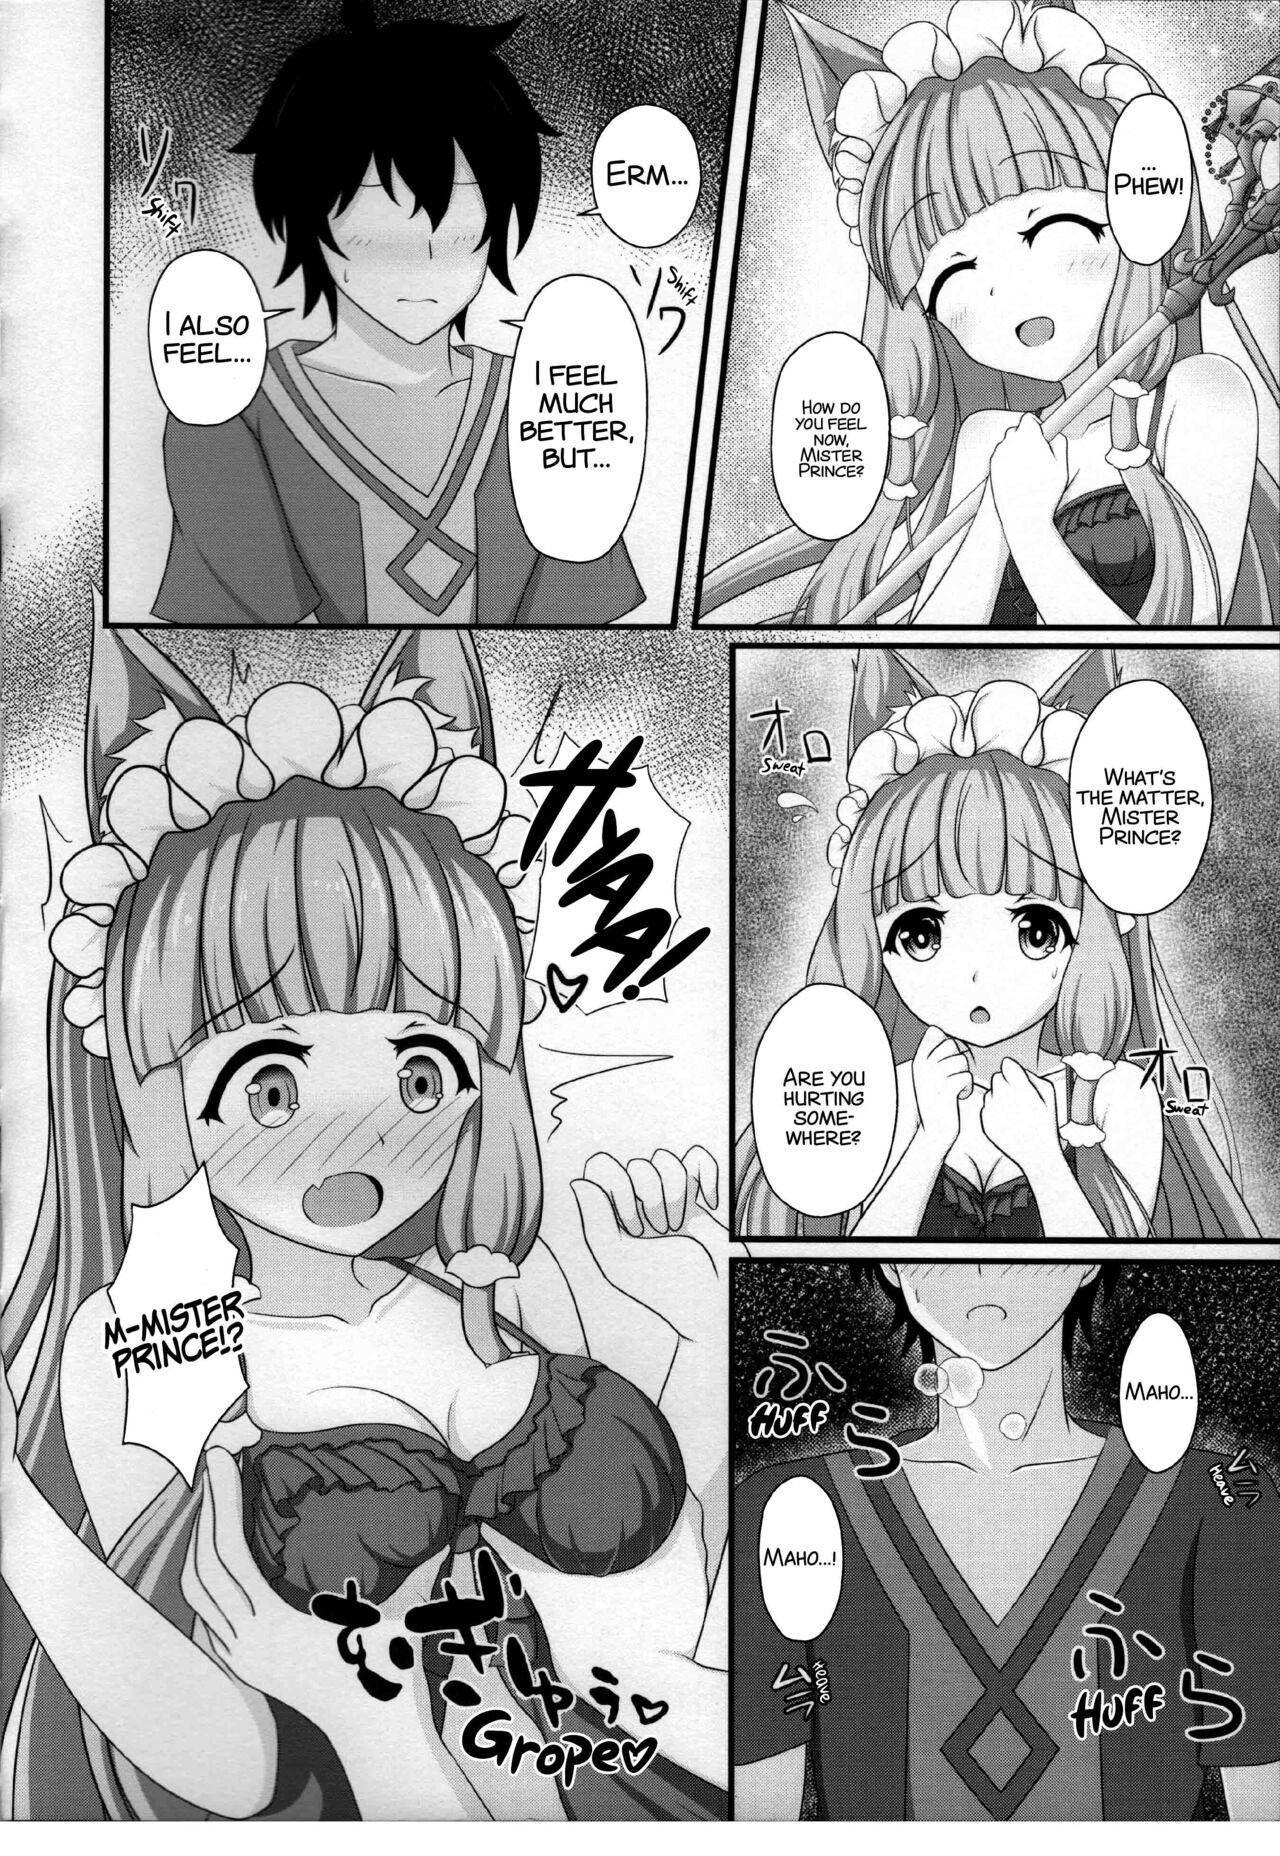 Internal Maho Hime Connect! 3 - Princess connect Urine - Page 8